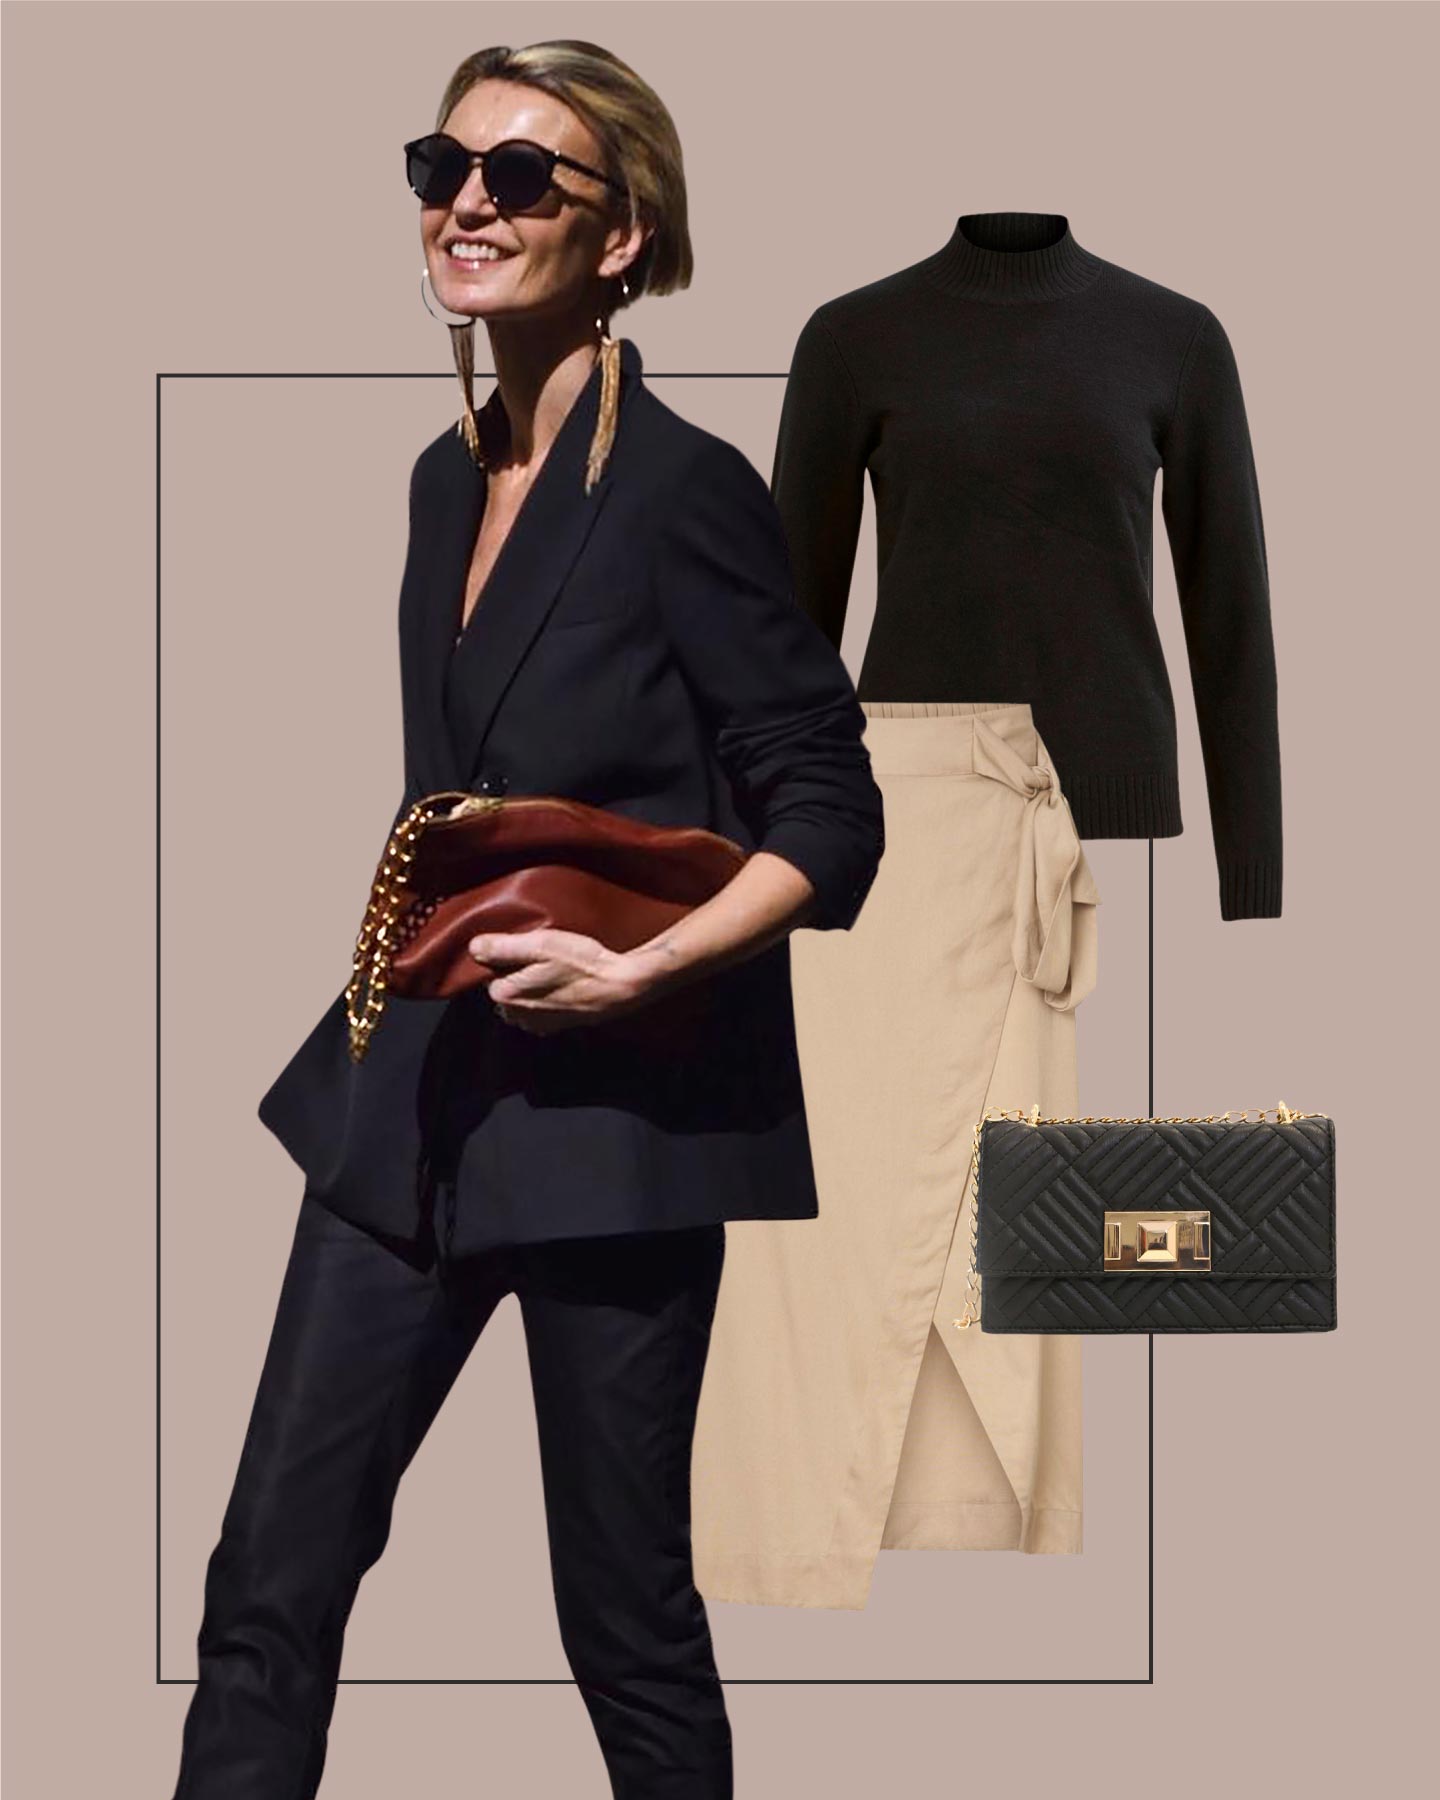 Let's style our Leather Pants for a classy girls night outfit